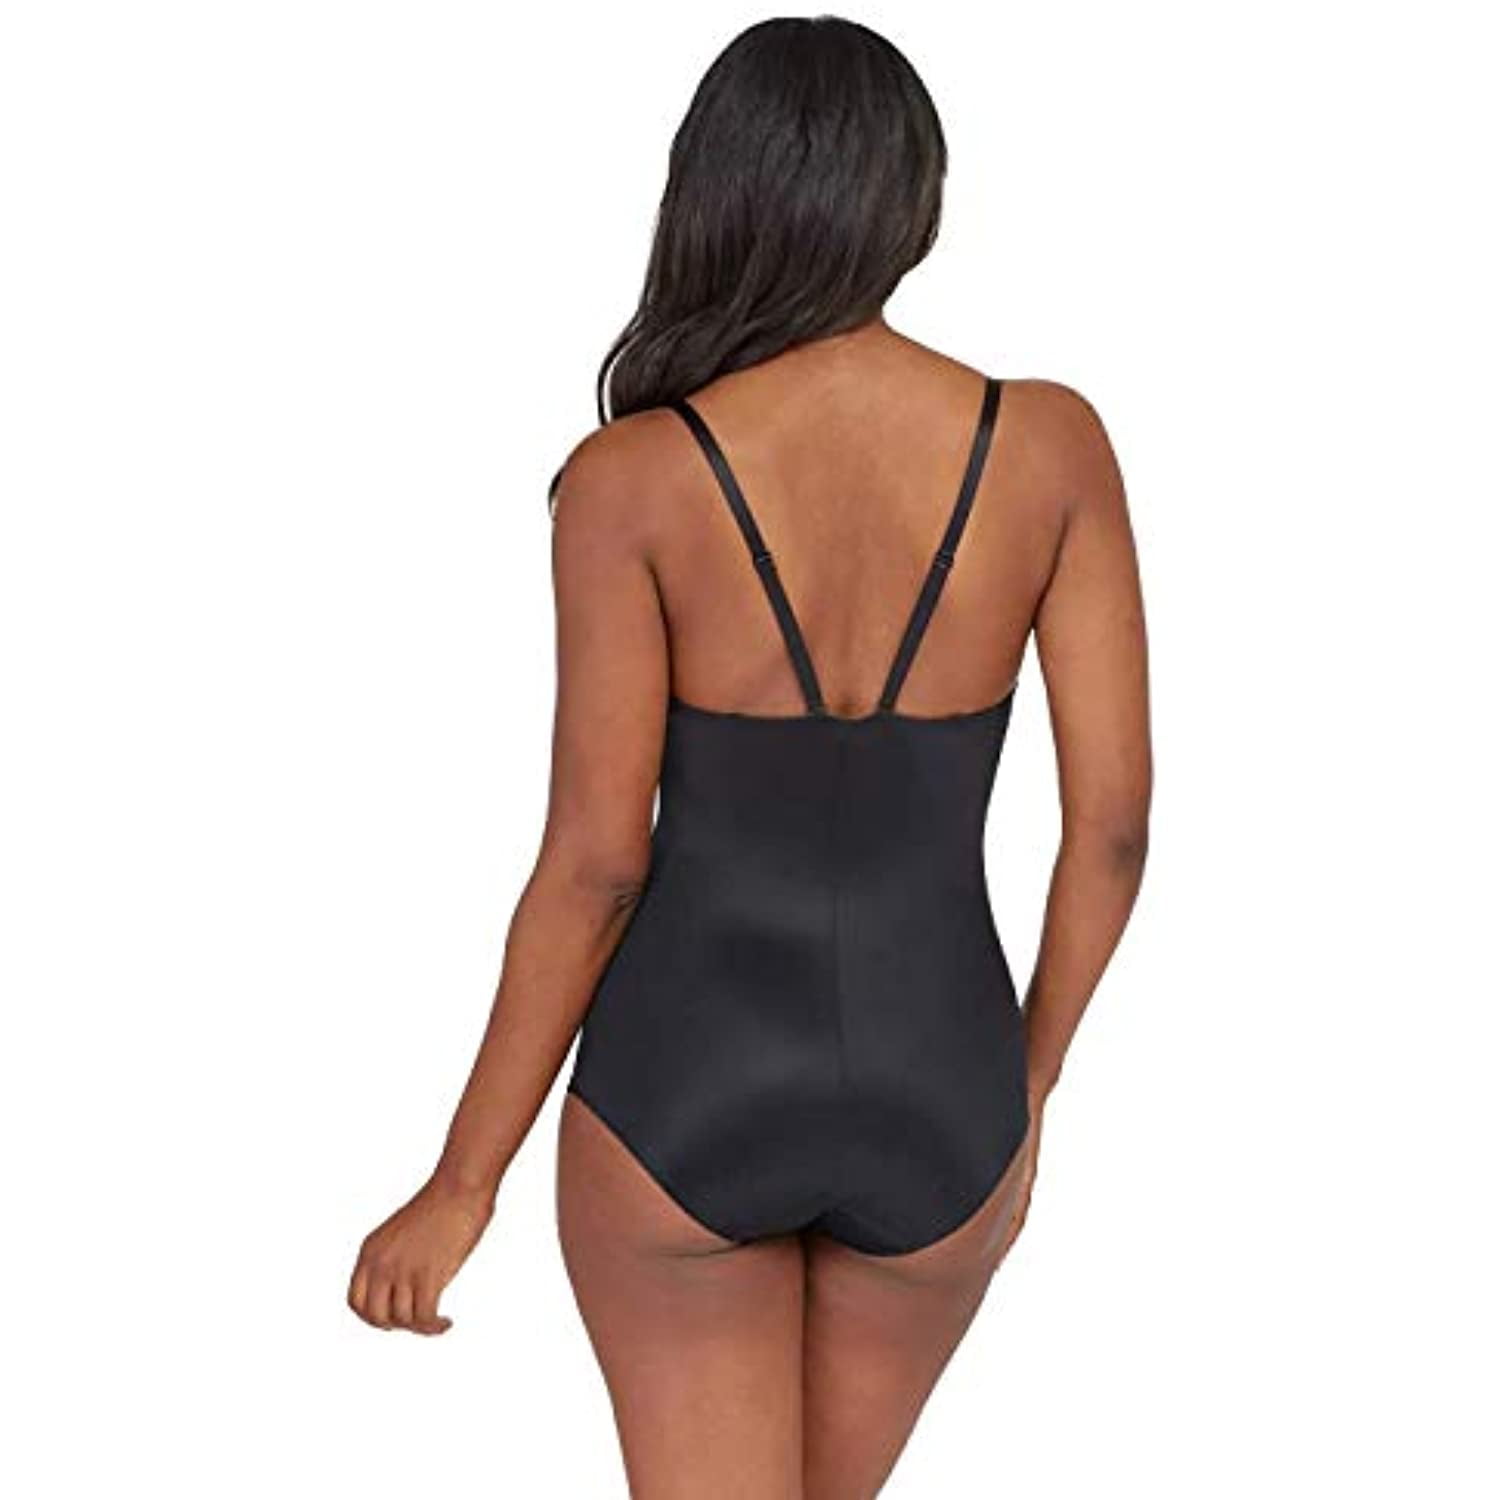 Assets by Spanx Women's Shaping Micro Low Back Cupped Bodysuit Shapewear - ( Black, Large) 